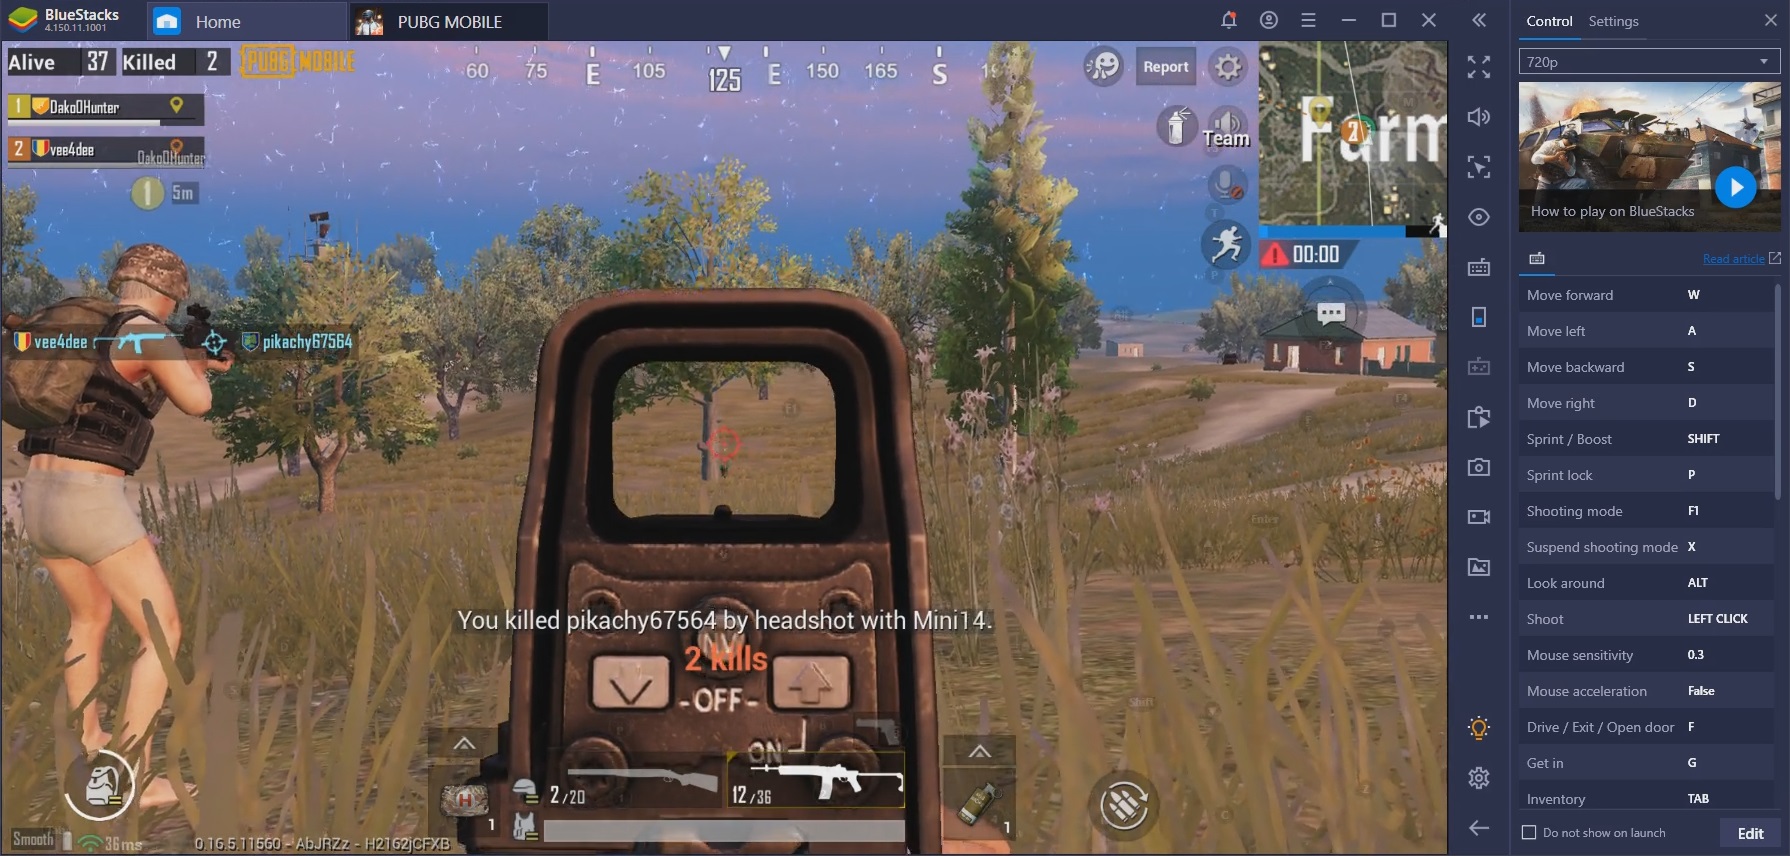 PUBG Mobile on PC: Duos and Squads Guide